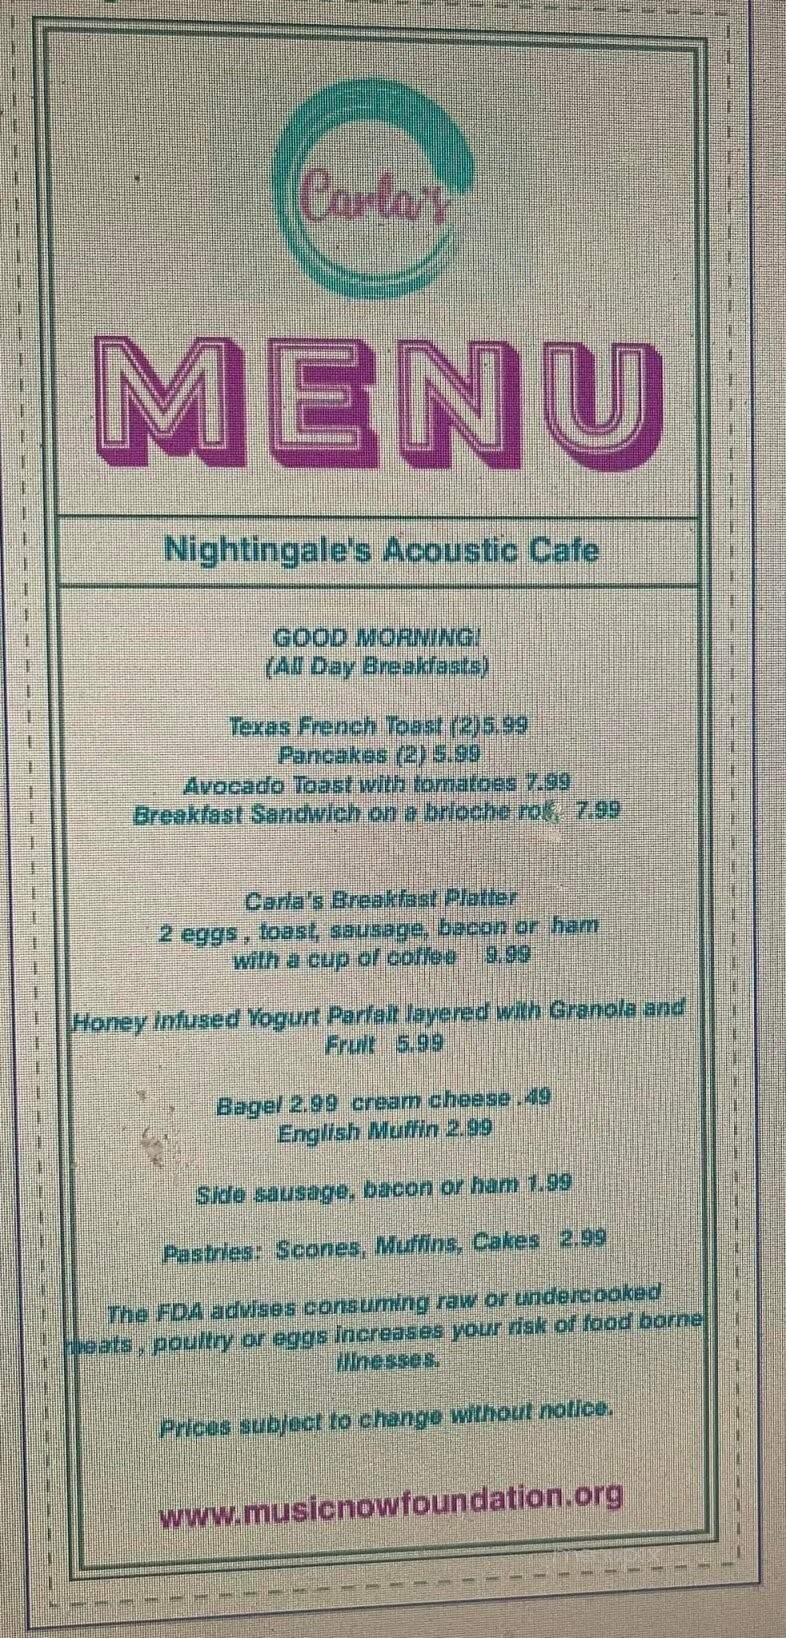 Nightingale's Acoustic Cafe - Old Lyme, CT